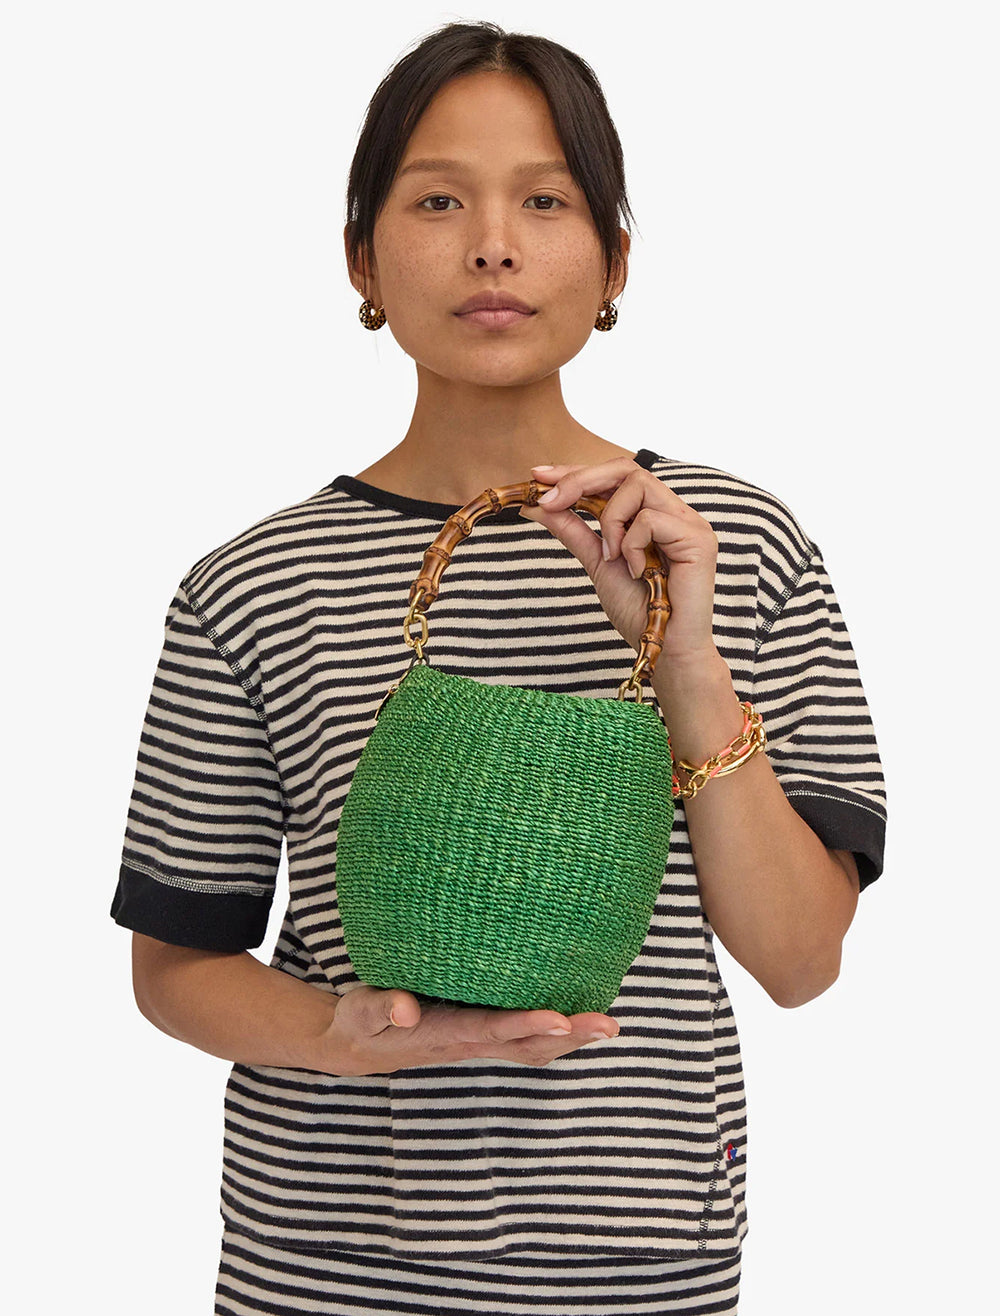 Model holding Clare V.'s pot de miel in green with bamboo handle.